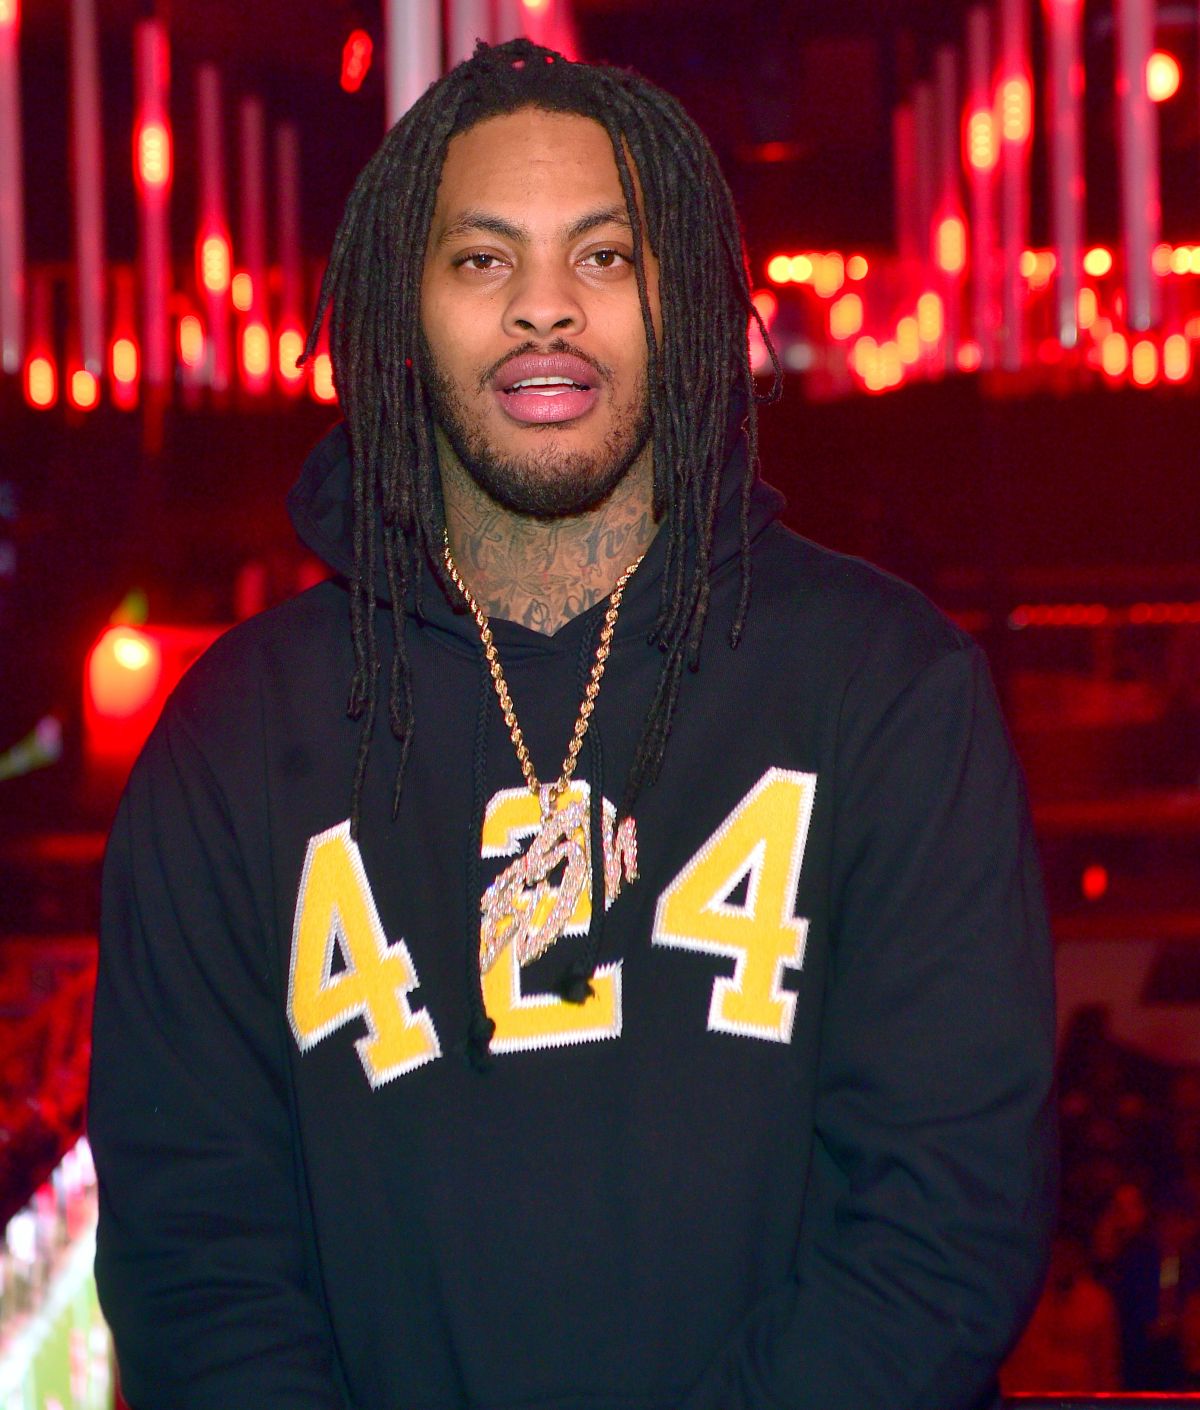 Rep Yo City 32 Famous Rappers From Atlanta (PHOTOS)